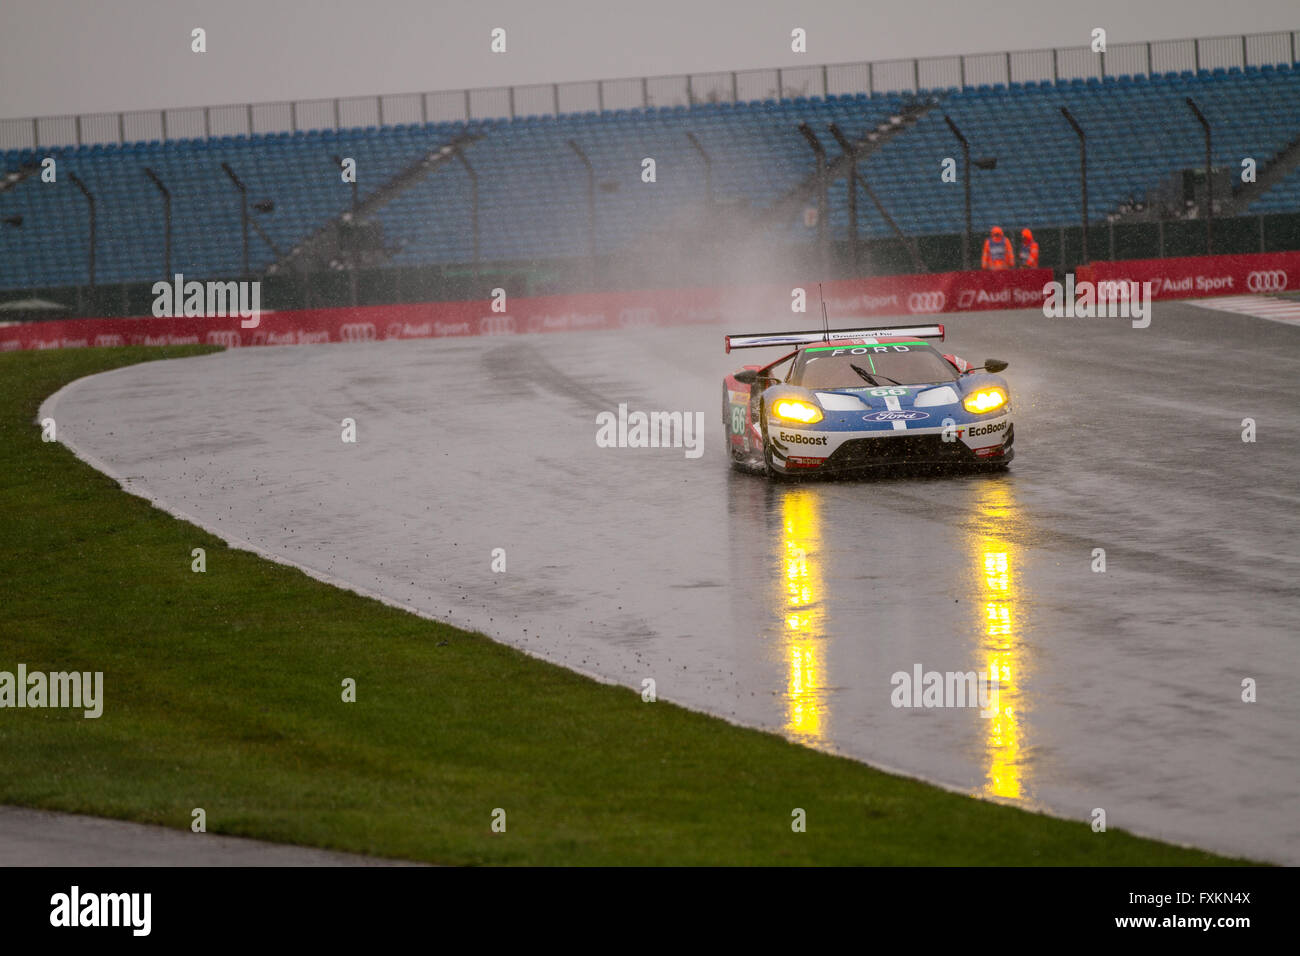 Silverstone, UK. 16th April, 2016. The No66 Ford Chip Ganassi Team UK Ford GT in the snow at Silverstone during practise Credit:  steven roe/Alamy Live News Stock Photo